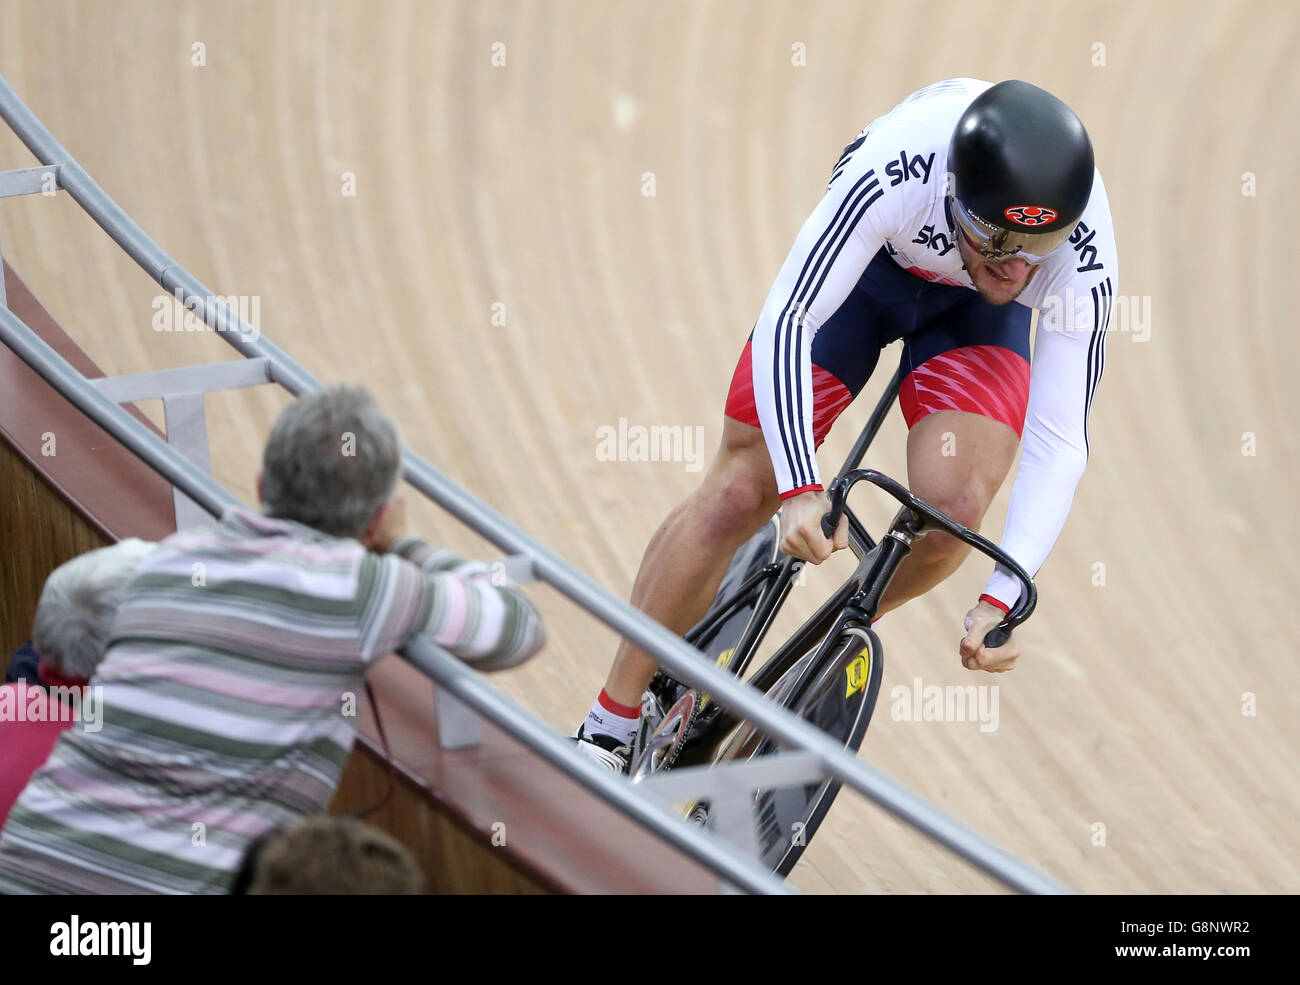 Great Britain's Callum Skinner during the Men's Sprint qualifying during day three of the UCI Track Cycling World Championships at Lee Valley VeloPark, London. PRESS ASSOCIATION Photo. Picture date: Friday March 4, 2016. See PA story CYCLING World. Photo credit should read: Tim Goode/PA Wire. RESTRICTIONS: , No commercial use without prior permission, please contact PA Images for further information: Tel: +44 (0) 115 8447447. Stock Photo